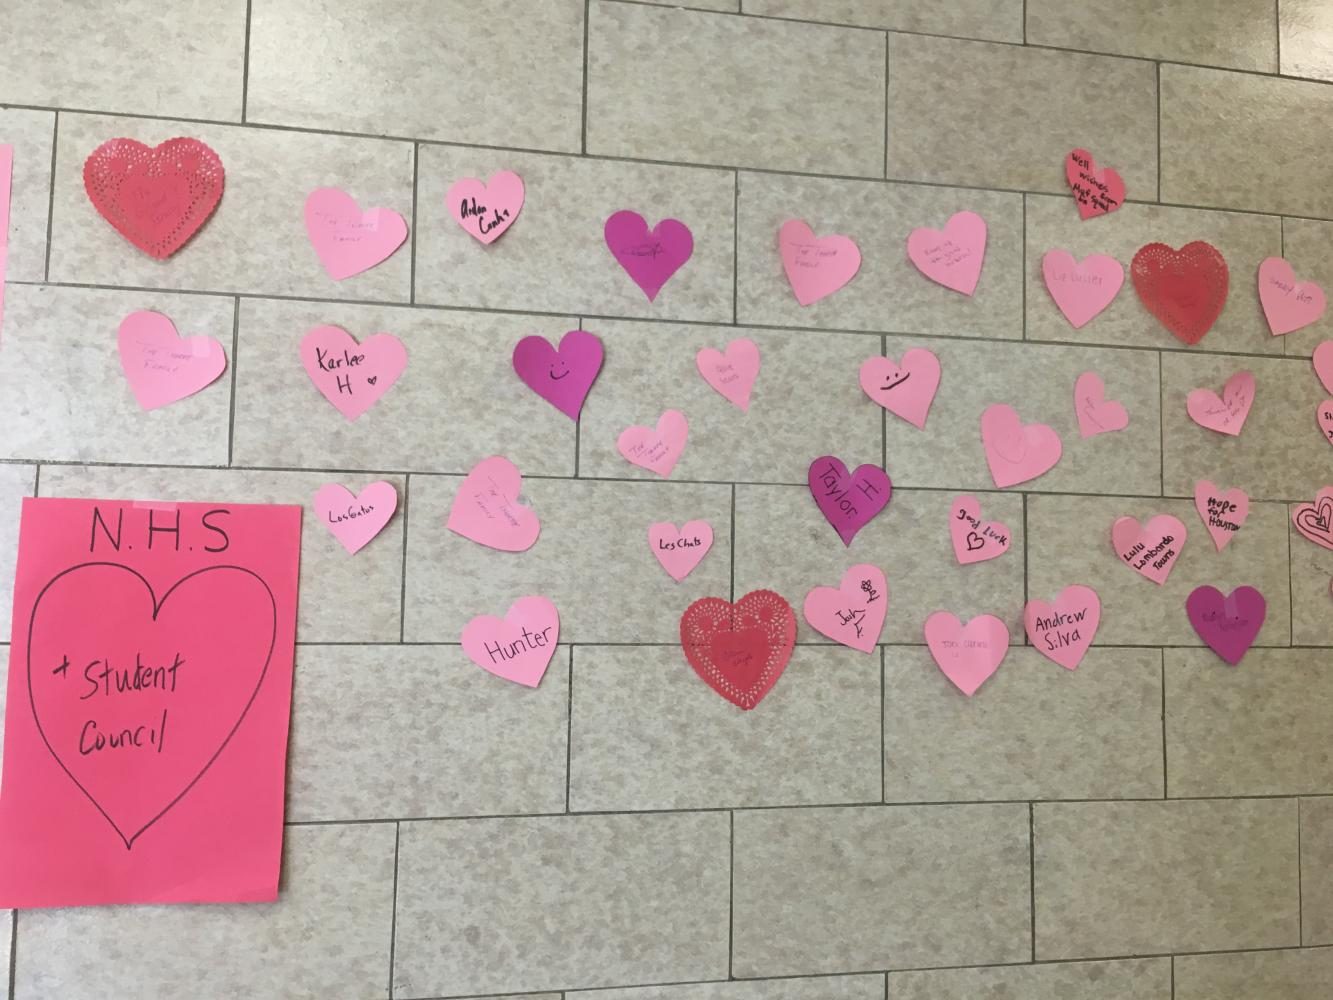 Hearts adorn the wall outside of the school store.